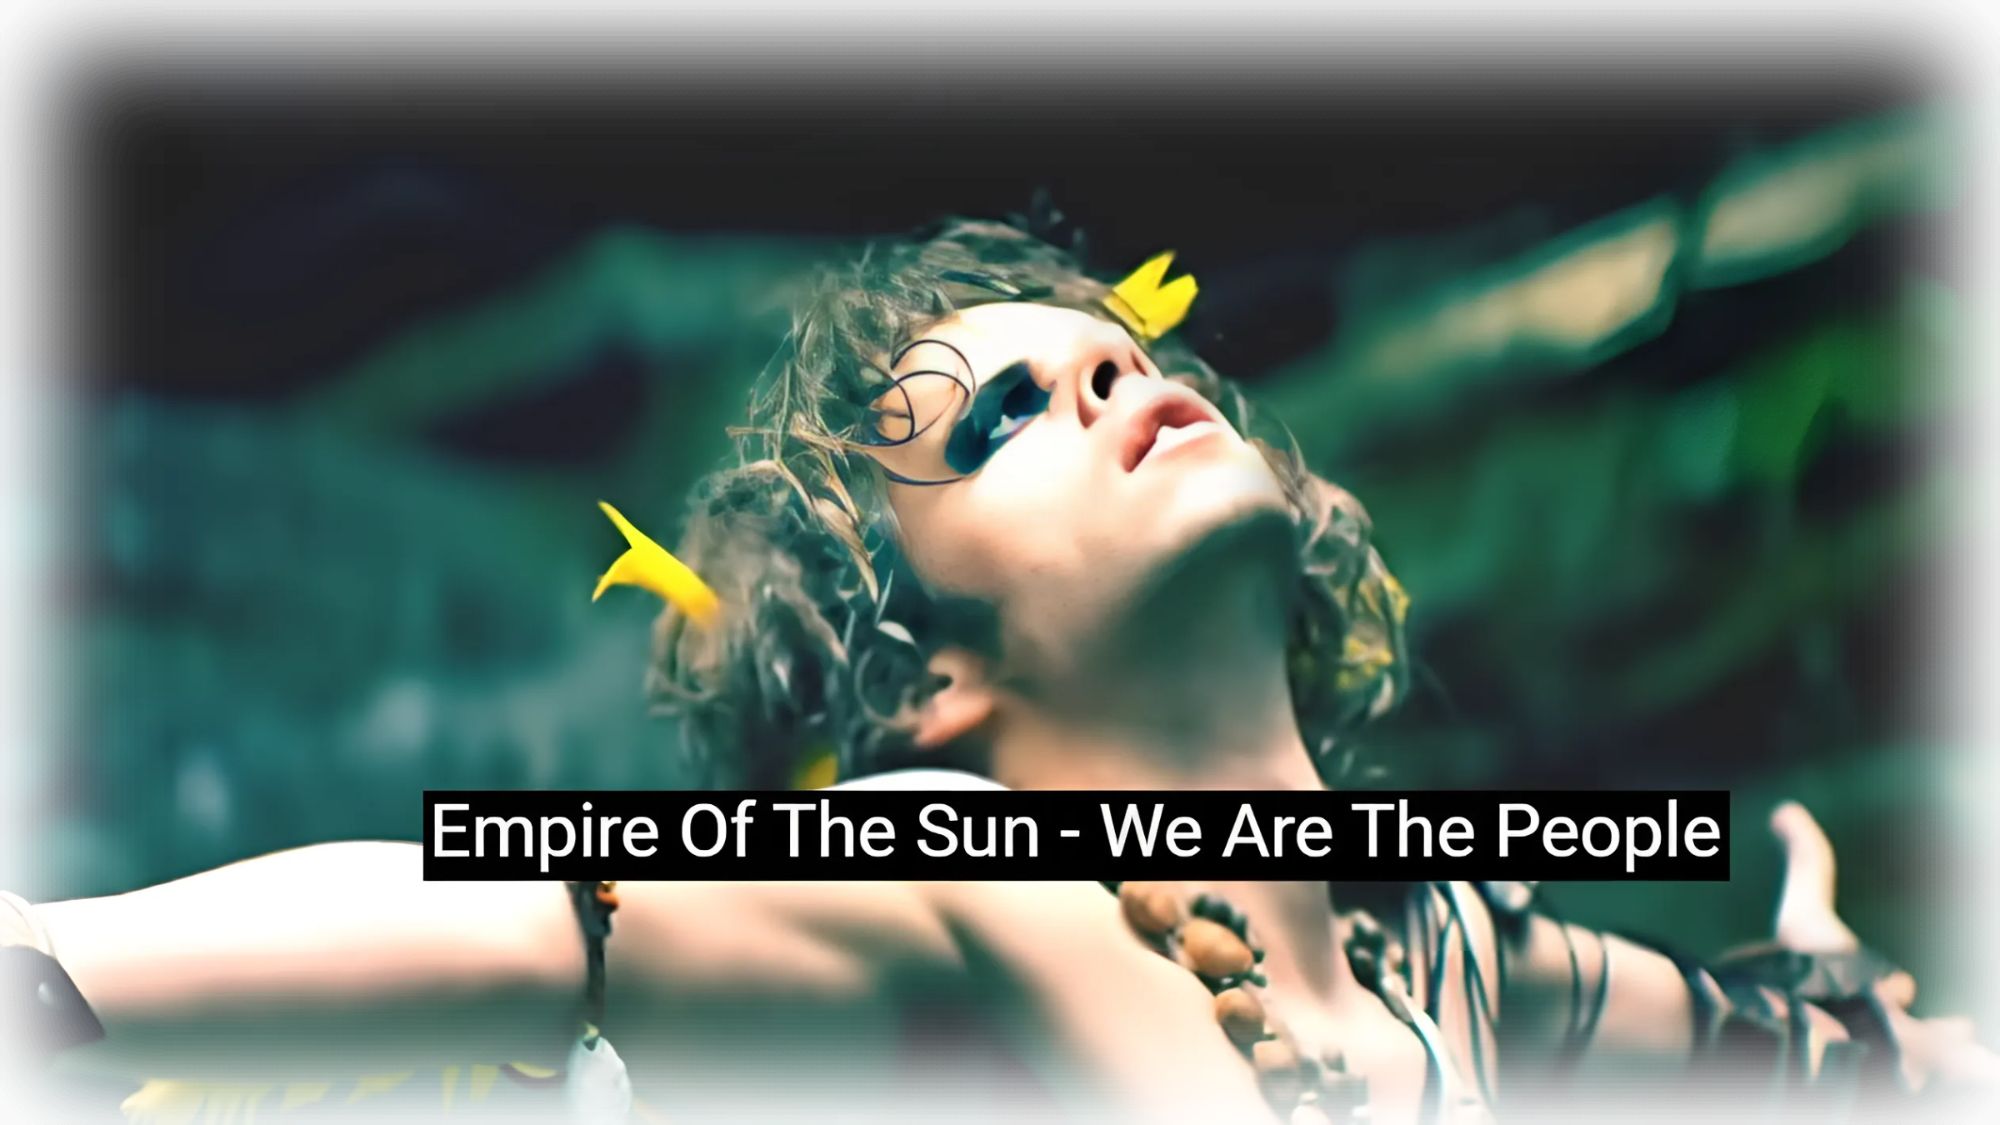 empire-of-the-sun-we-are-the-people-perevod-na-russkij